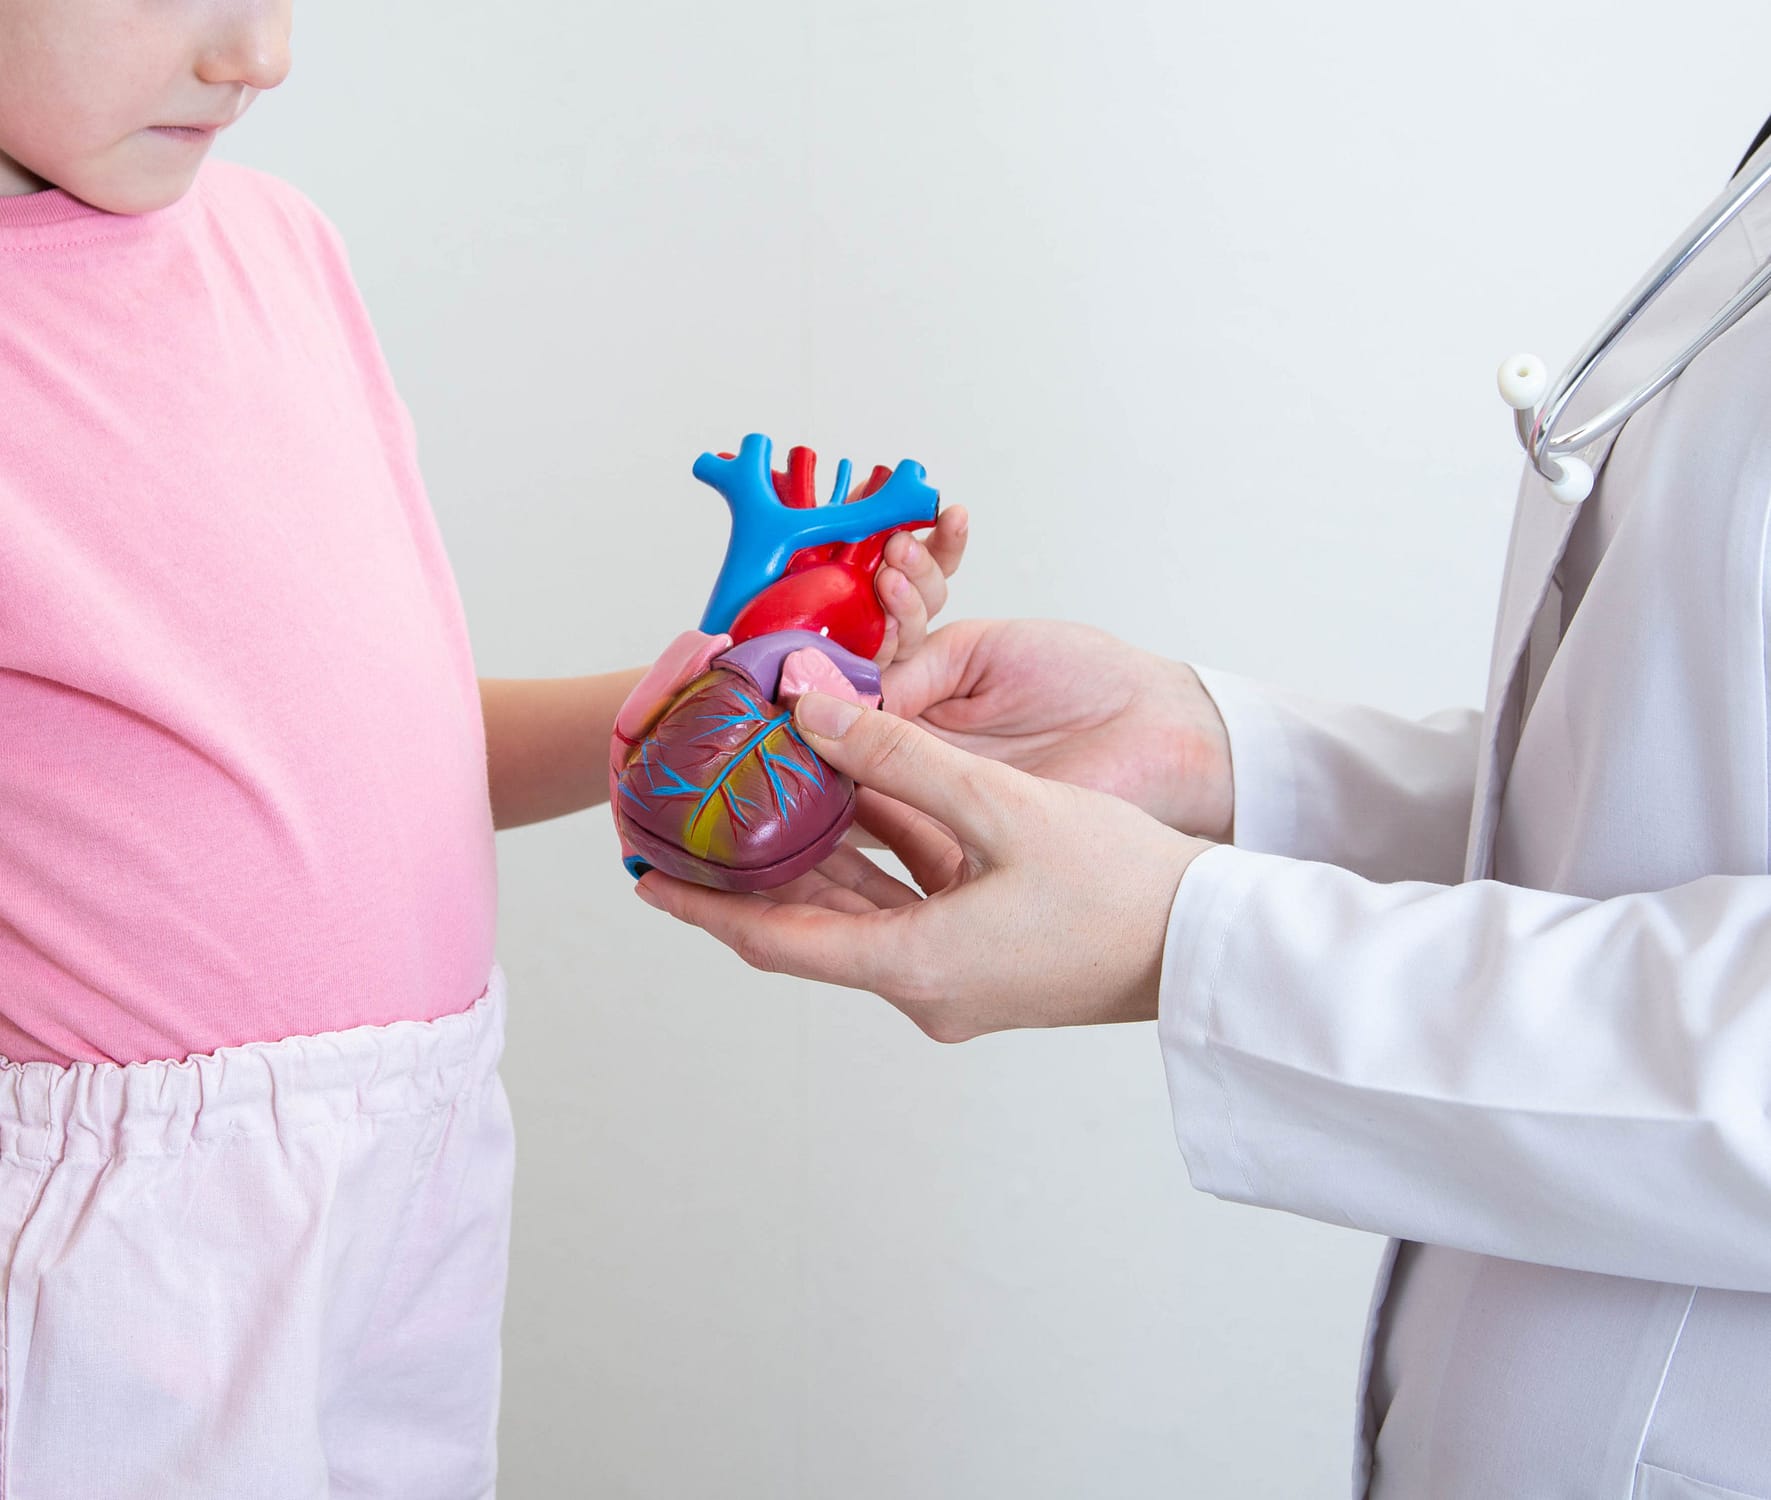 The hands of a child and the hands of a doctor-cardiologist are holding a mock-up of a heart. The concept of examination and treatment of the heart of children. Pediatric cardiology, close-up